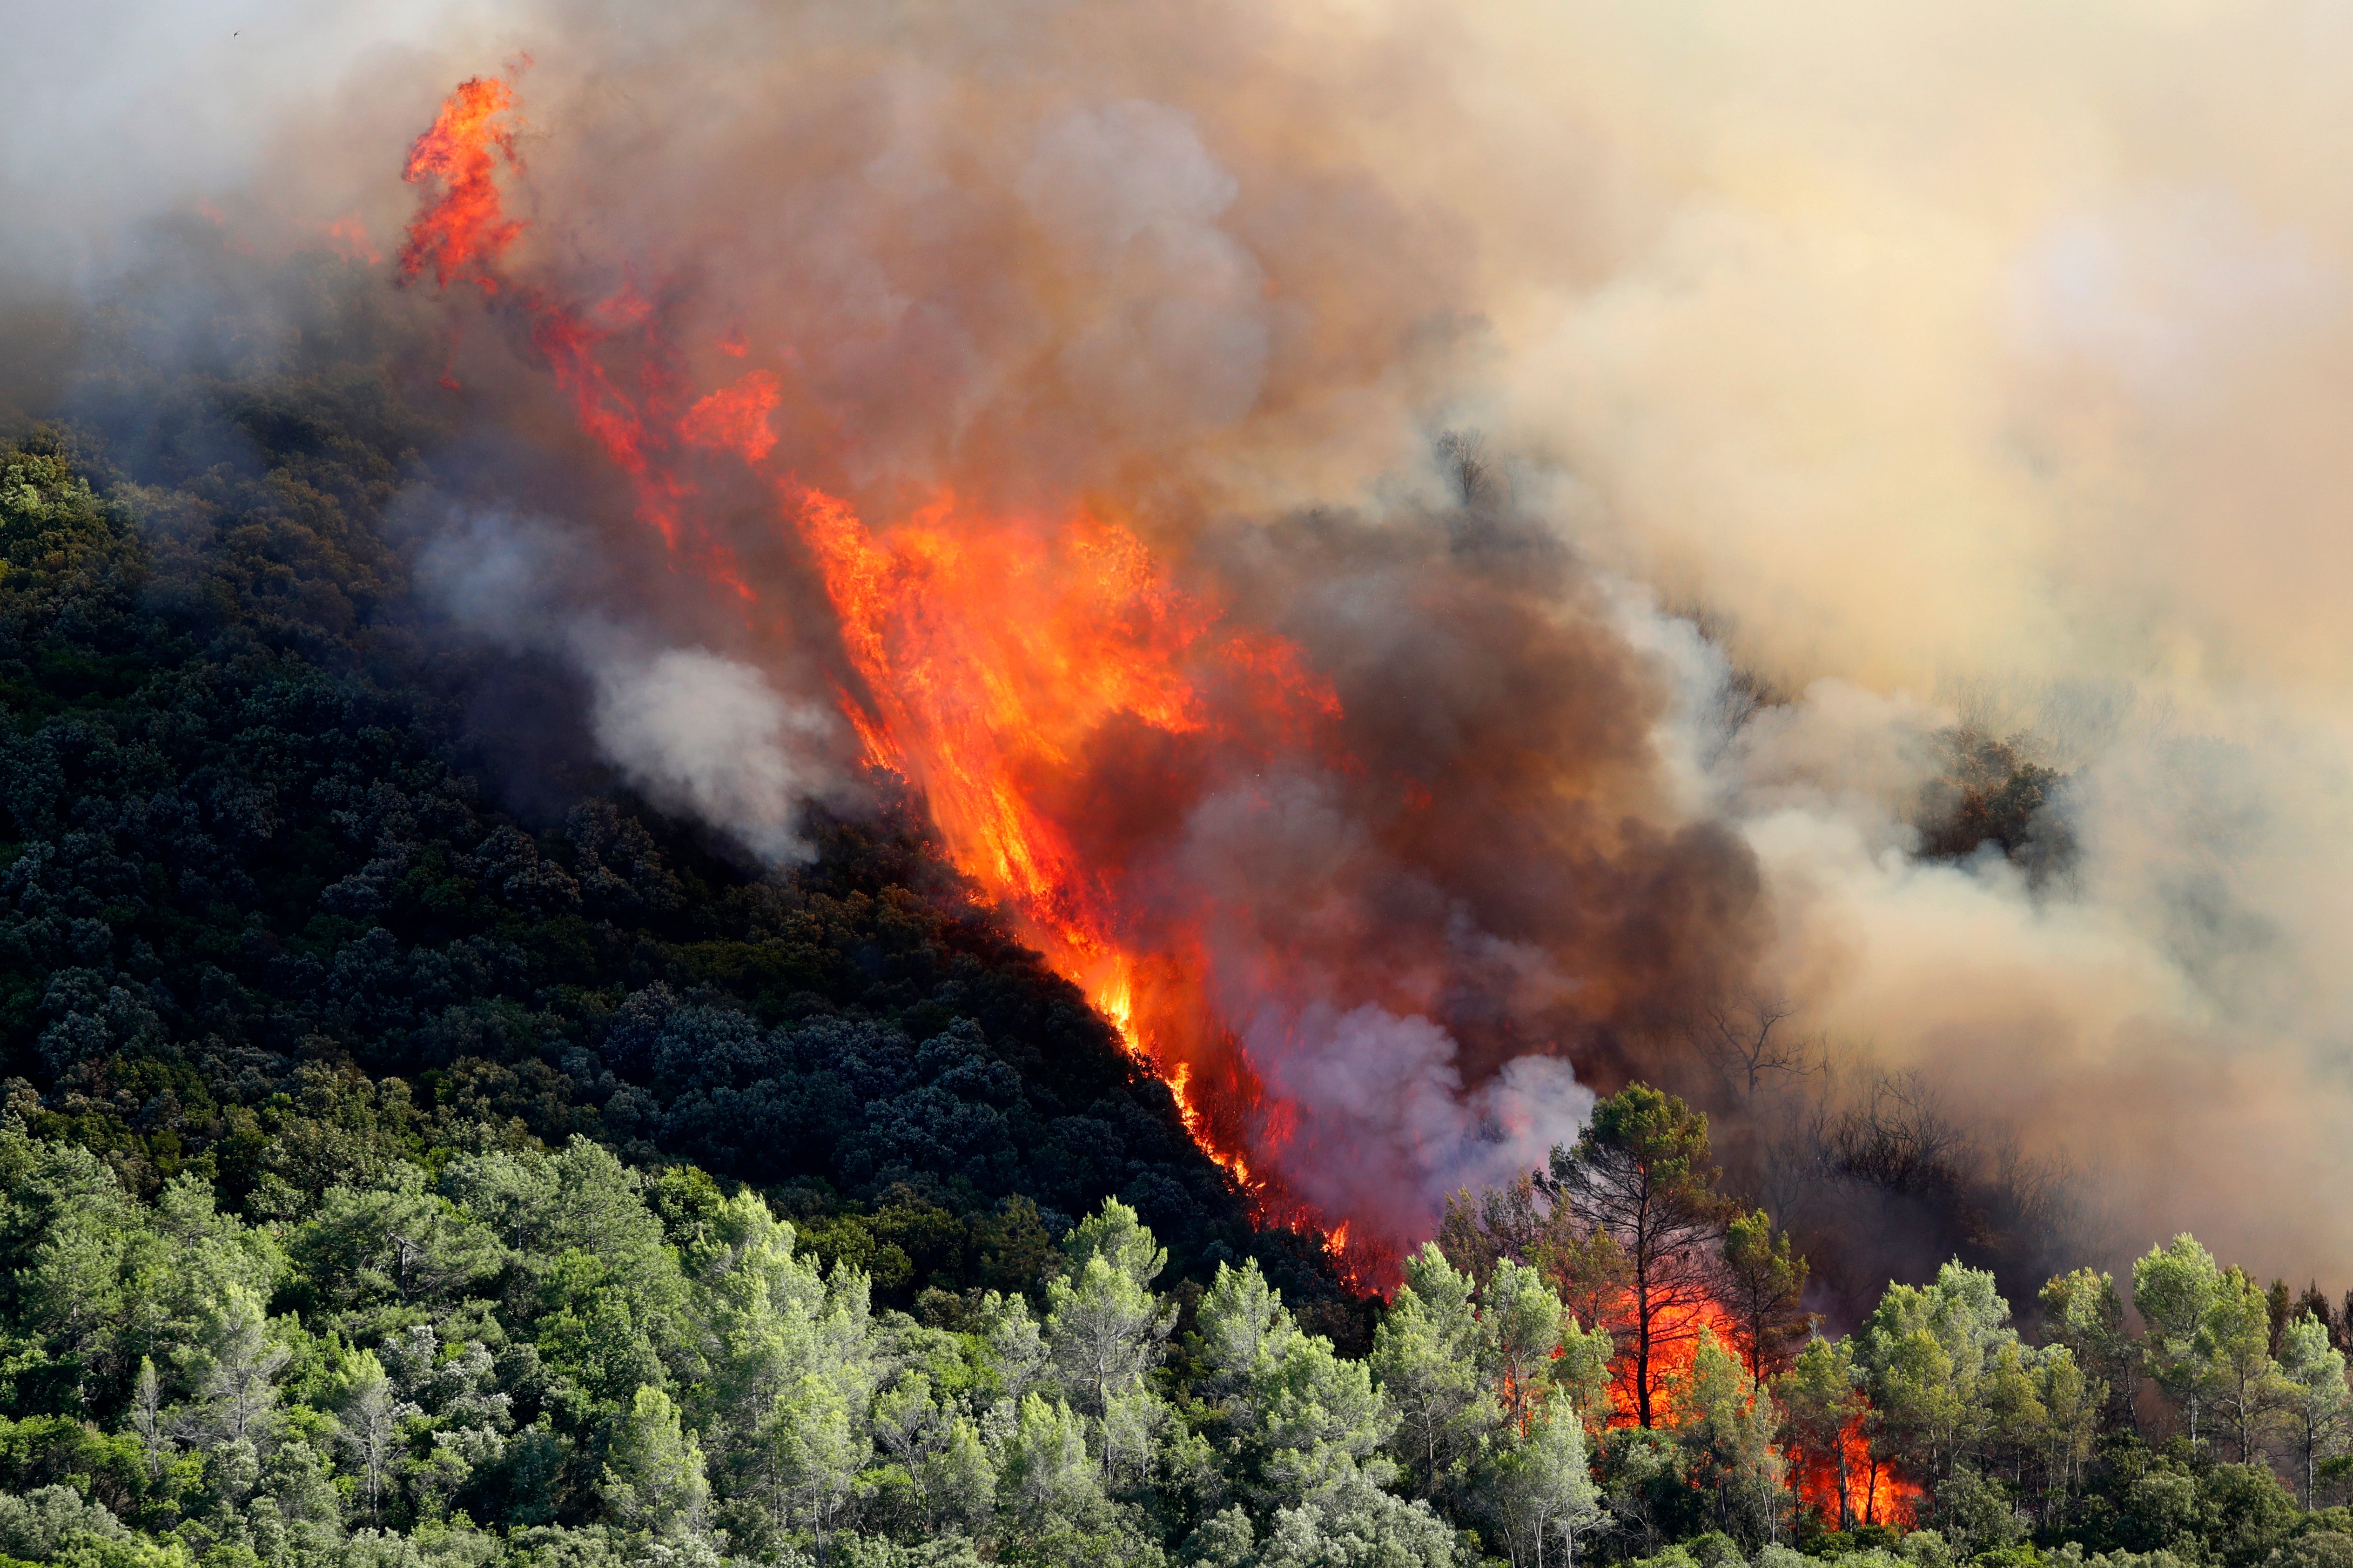 France has been devastated by wildfires in recent weeks as temperatures soared